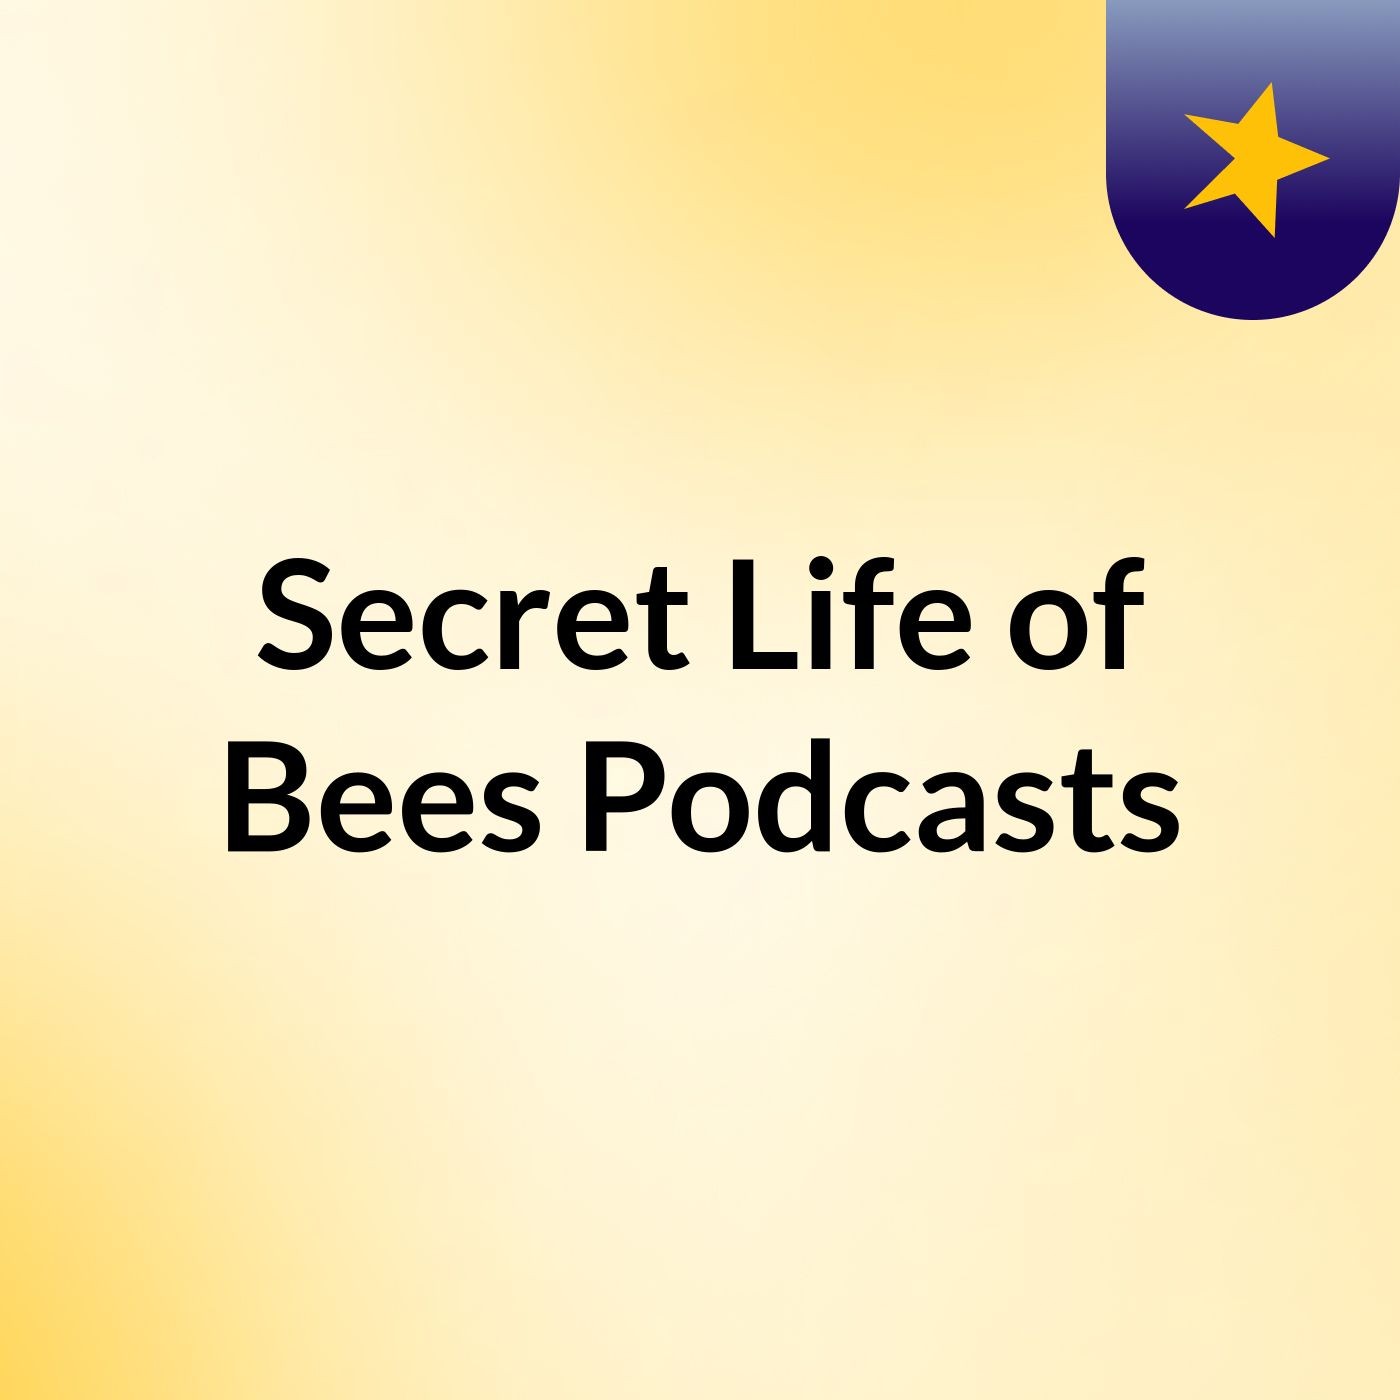 Conclusion - Secret Life of Bees